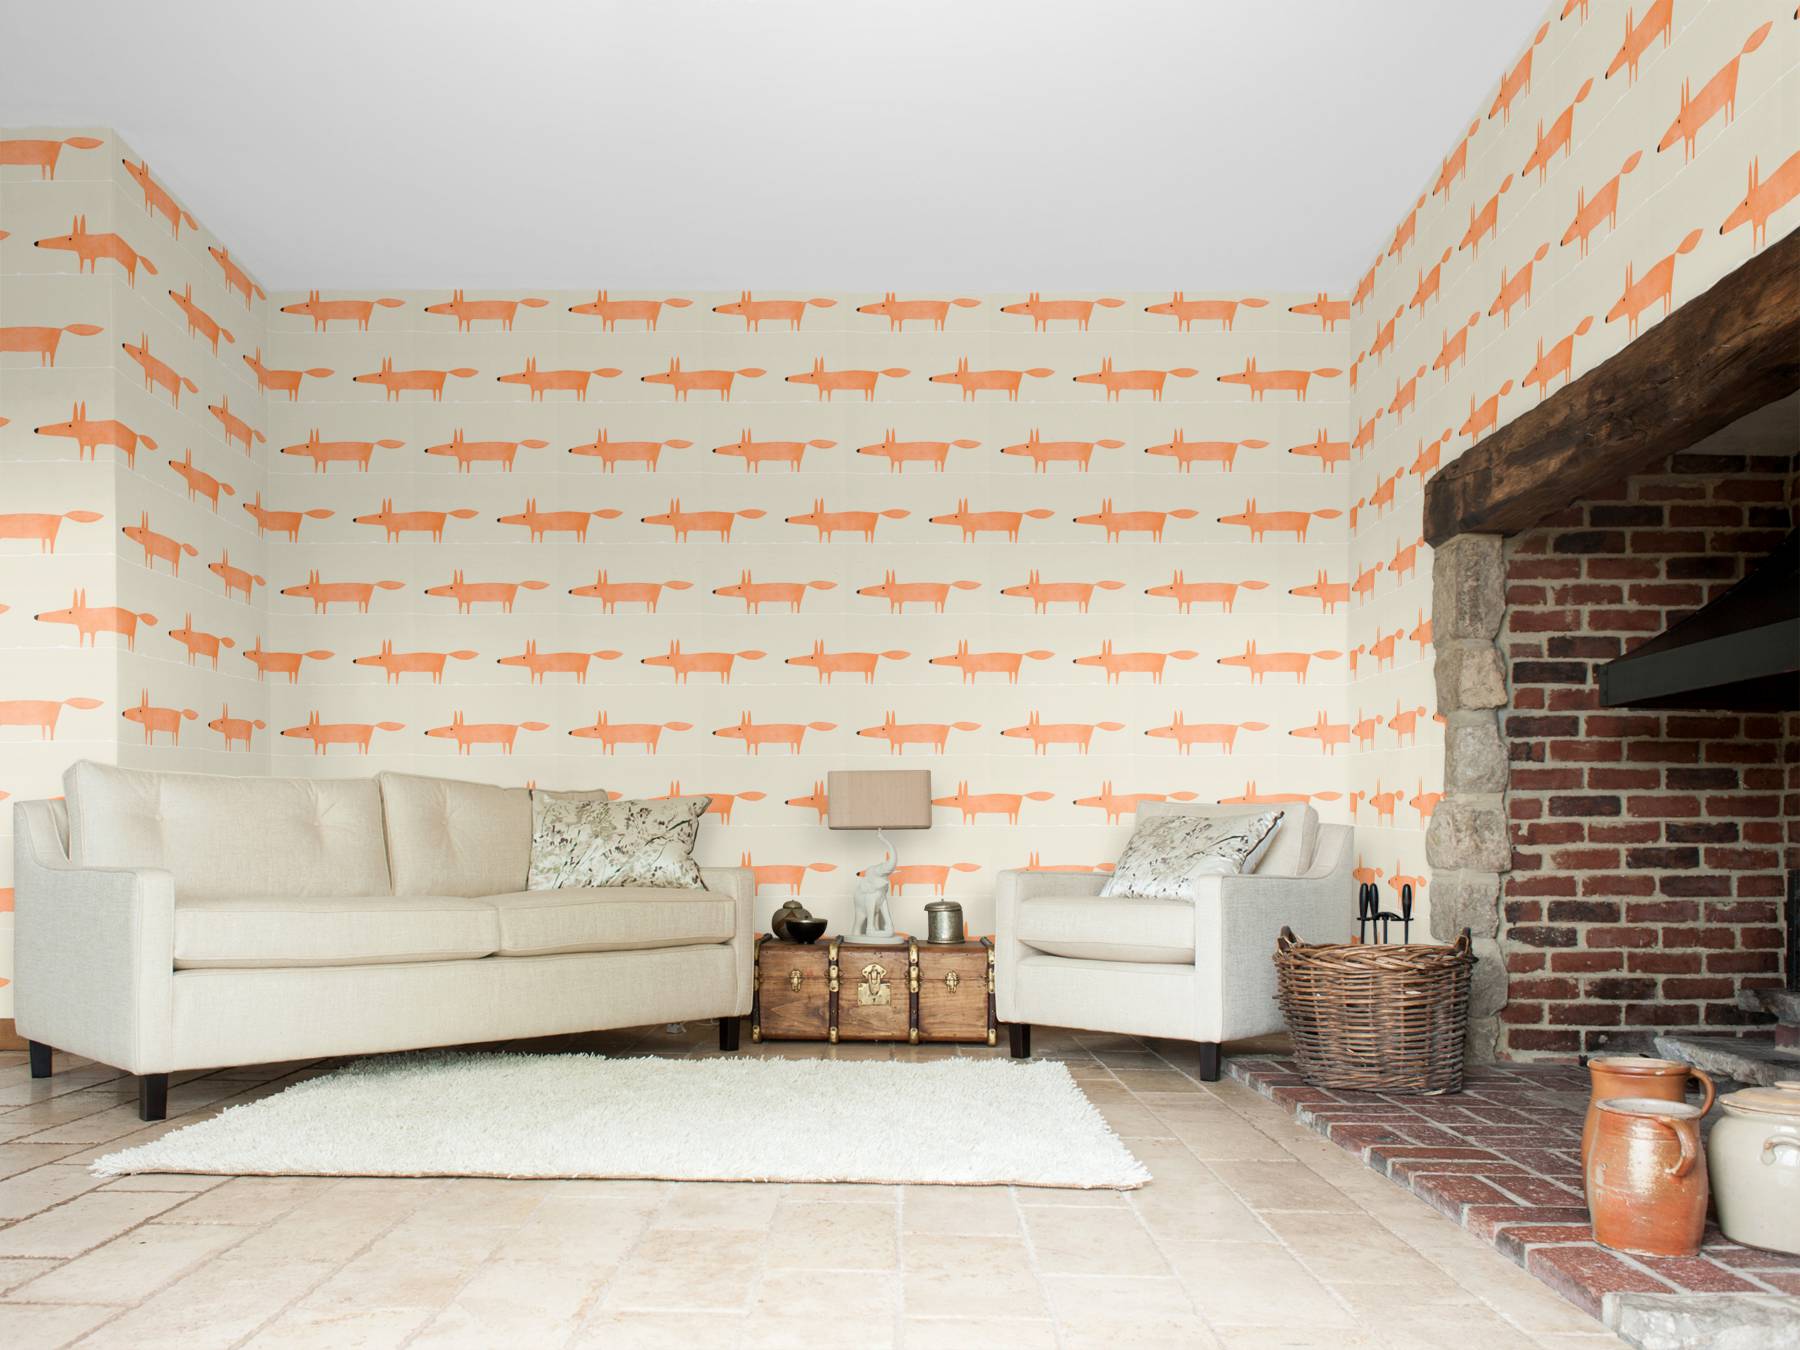 Mr Fox Roomset Image - Bumble Bee Farrow And Ball - HD Wallpaper 